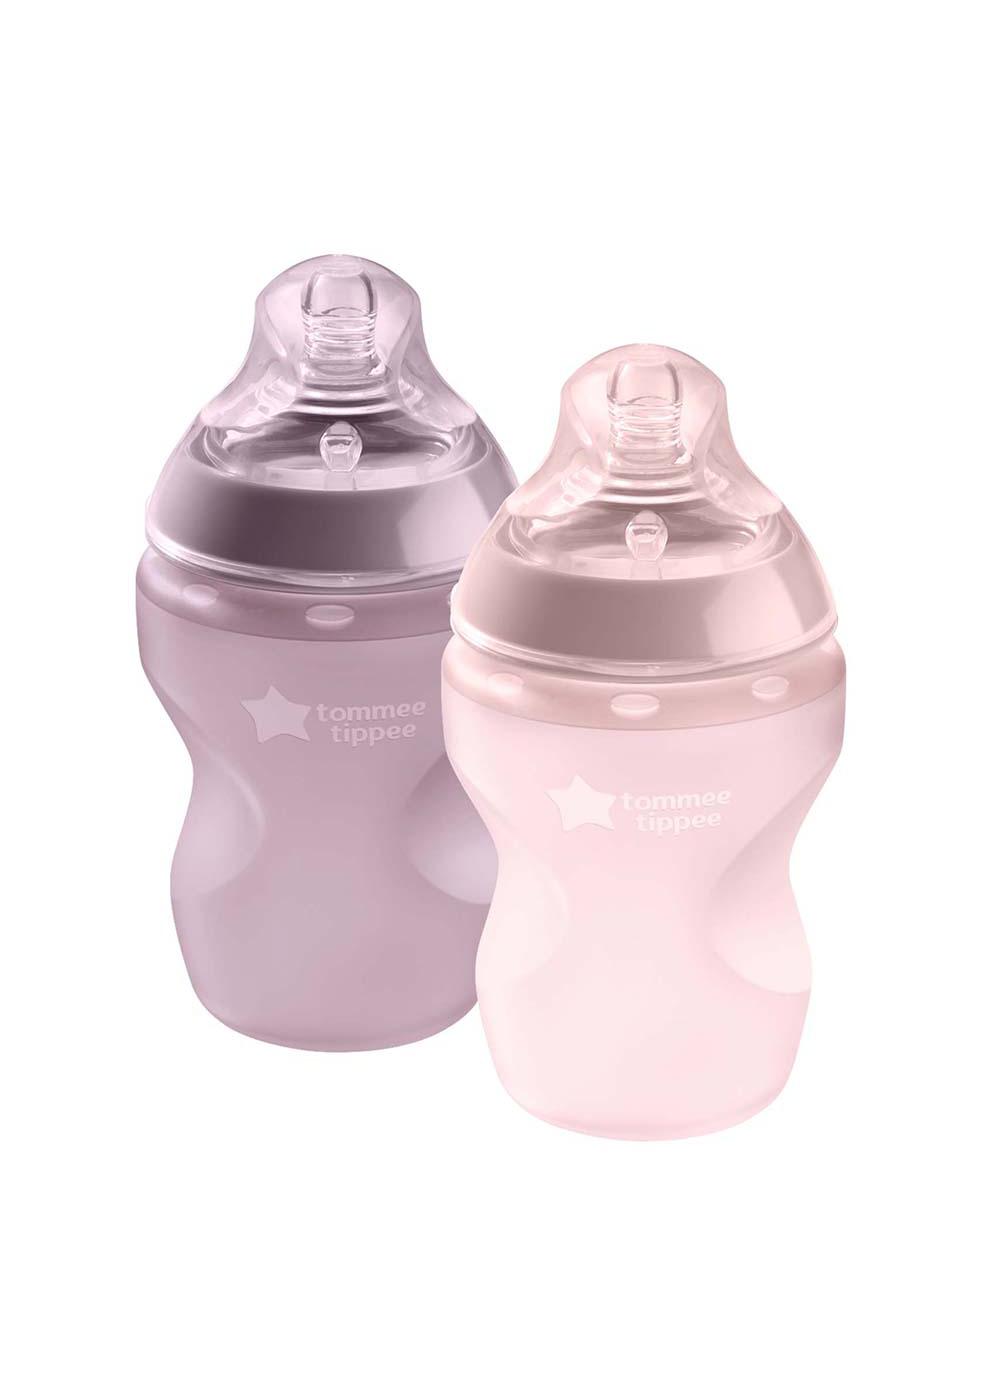 Tommee Tippee Closer To Nature 9 oz Silicone Bottles; image 2 of 2